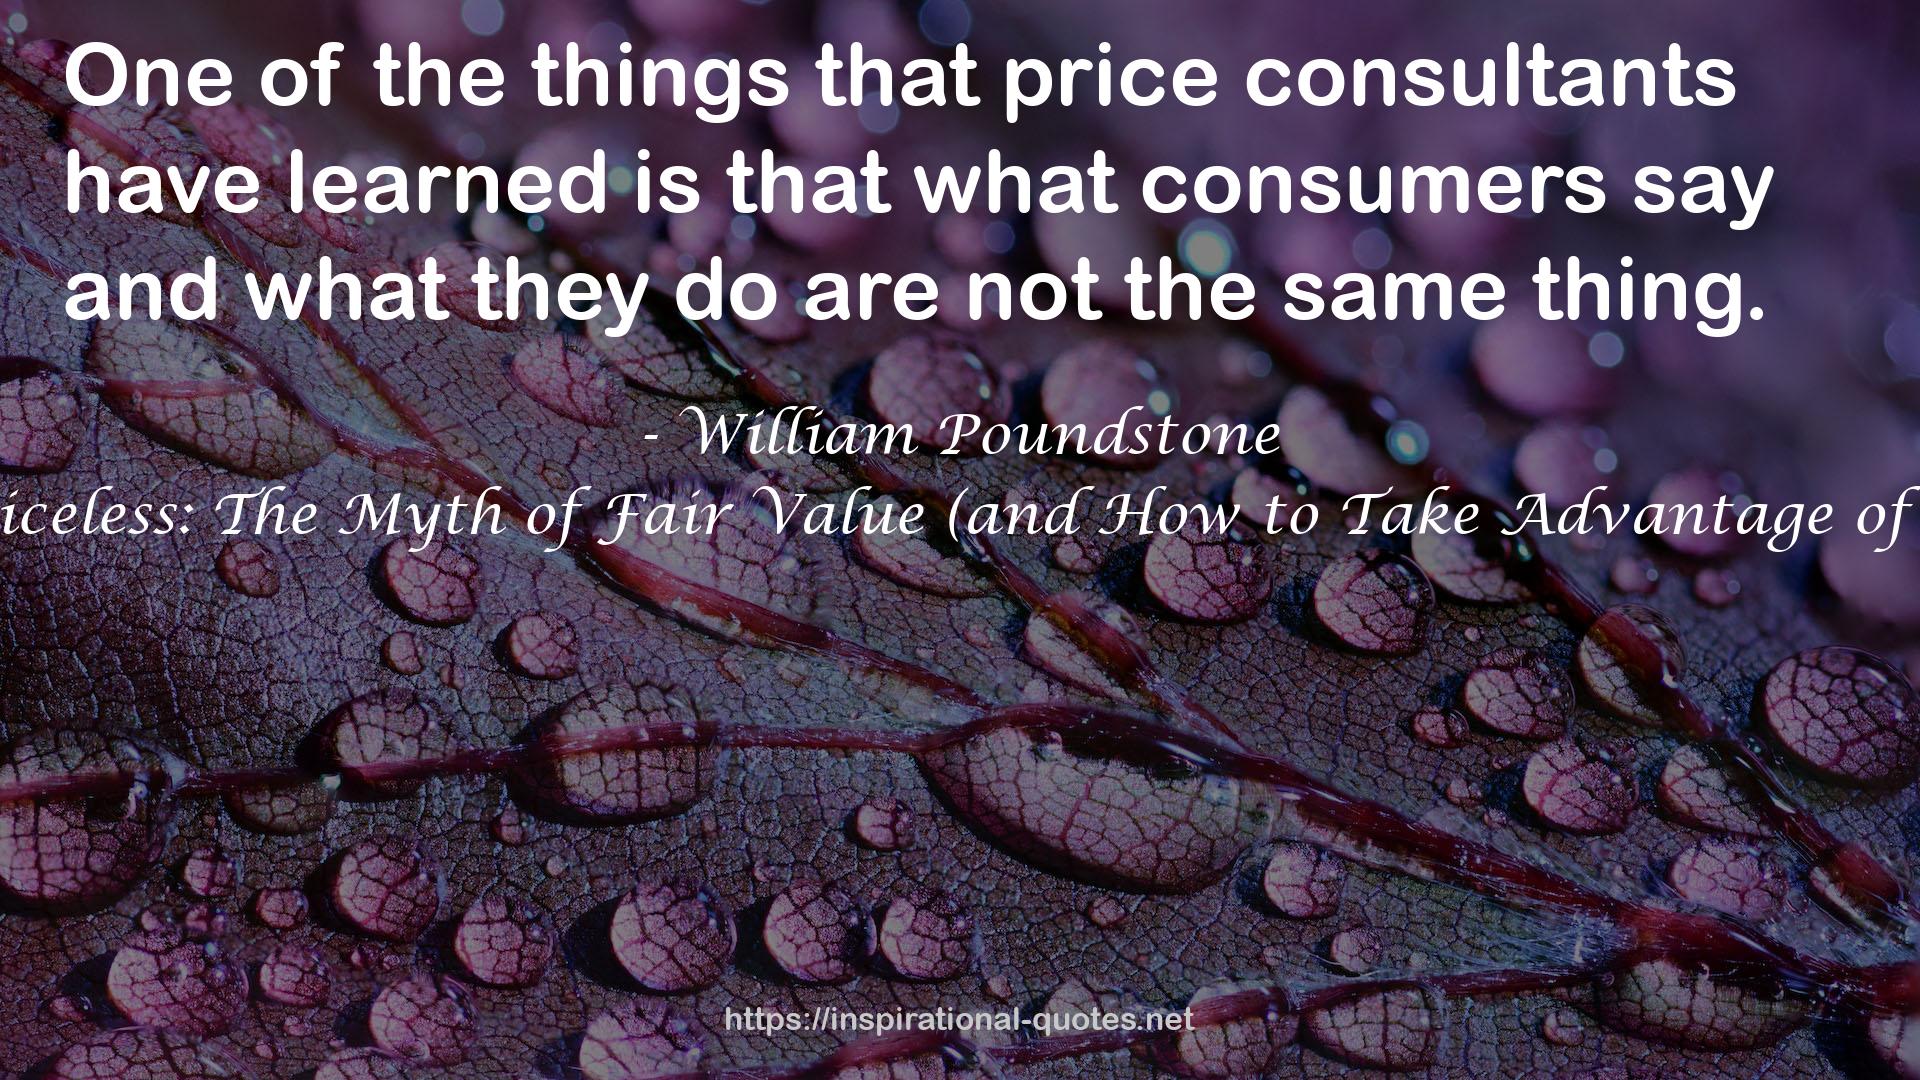 Priceless: The Myth of Fair Value (and How to Take Advantage of It) QUOTES